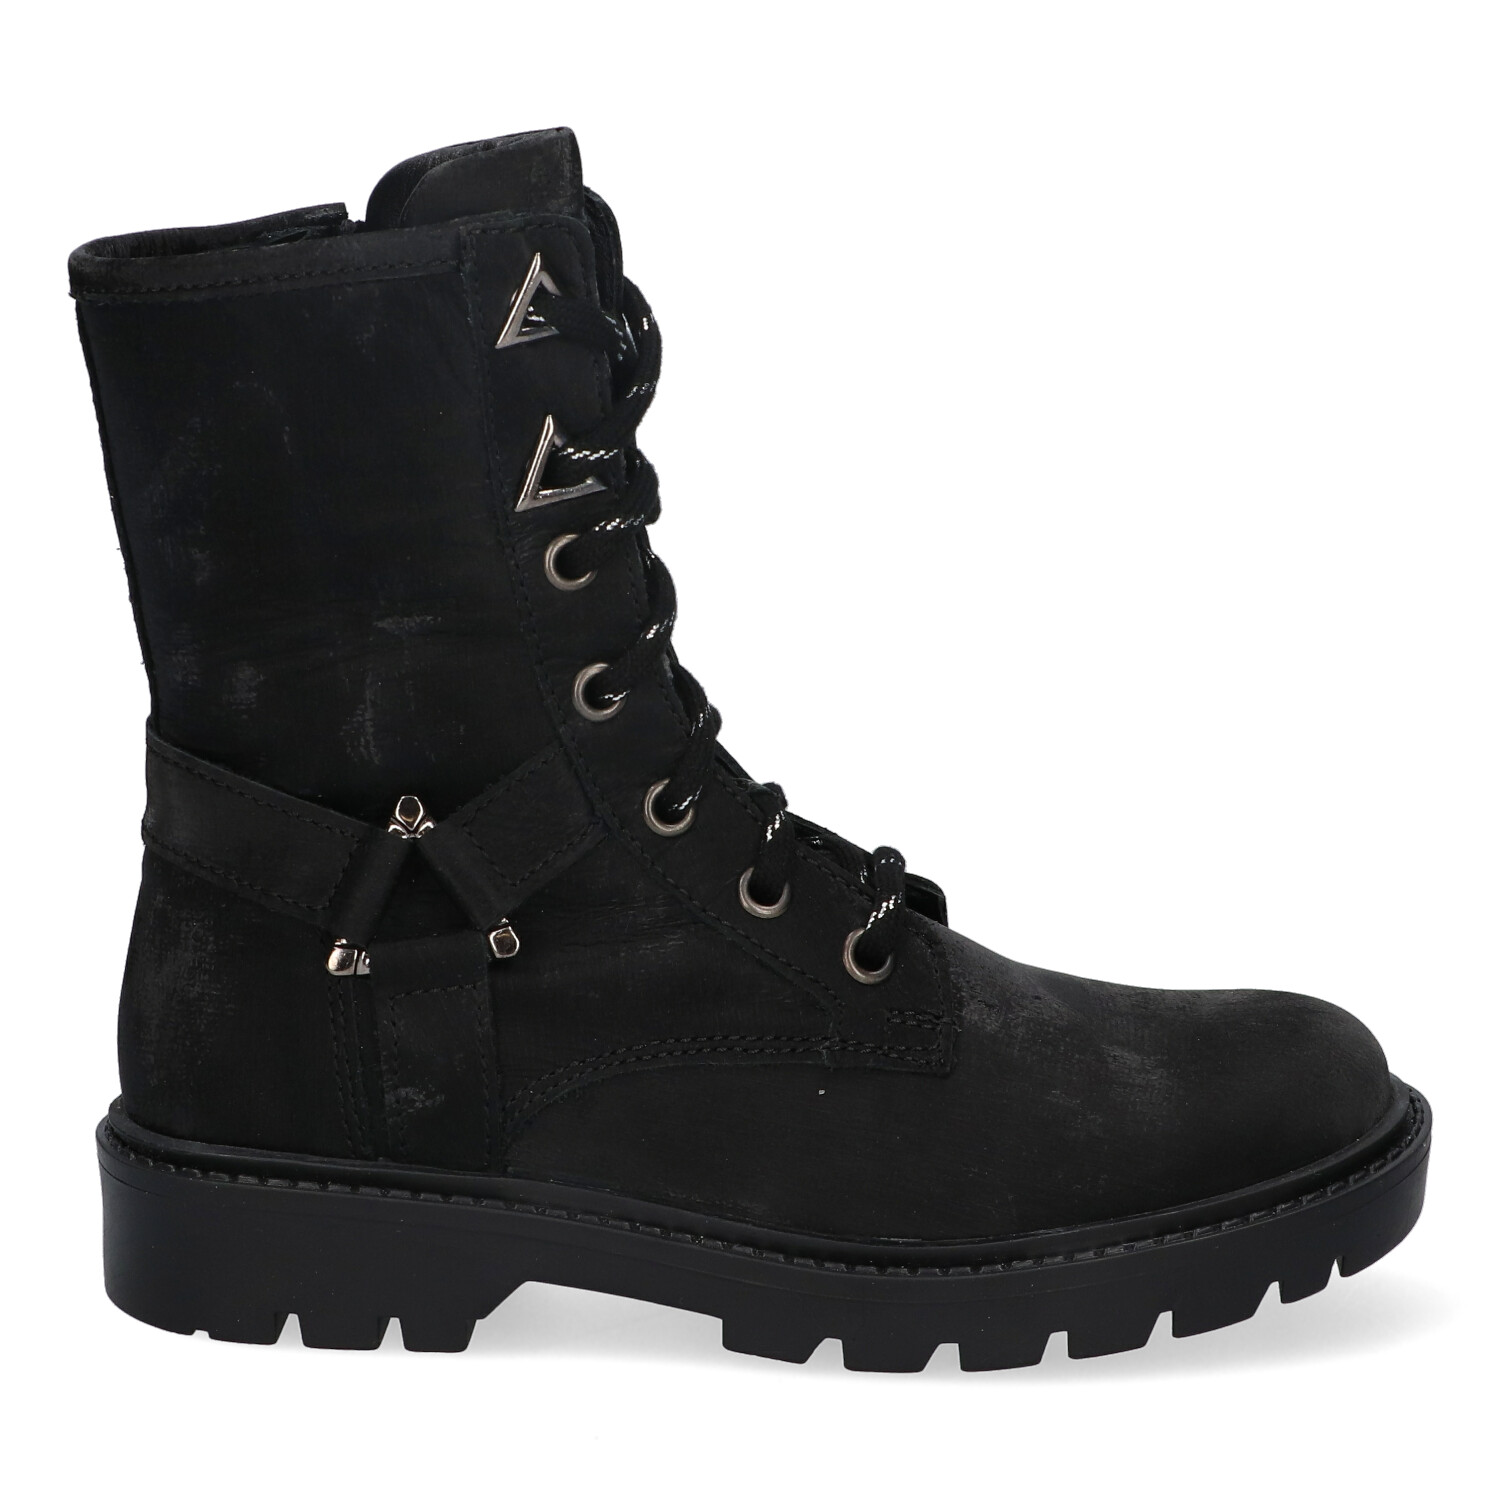 Twins 324674 Boot Hester Hery Black 5